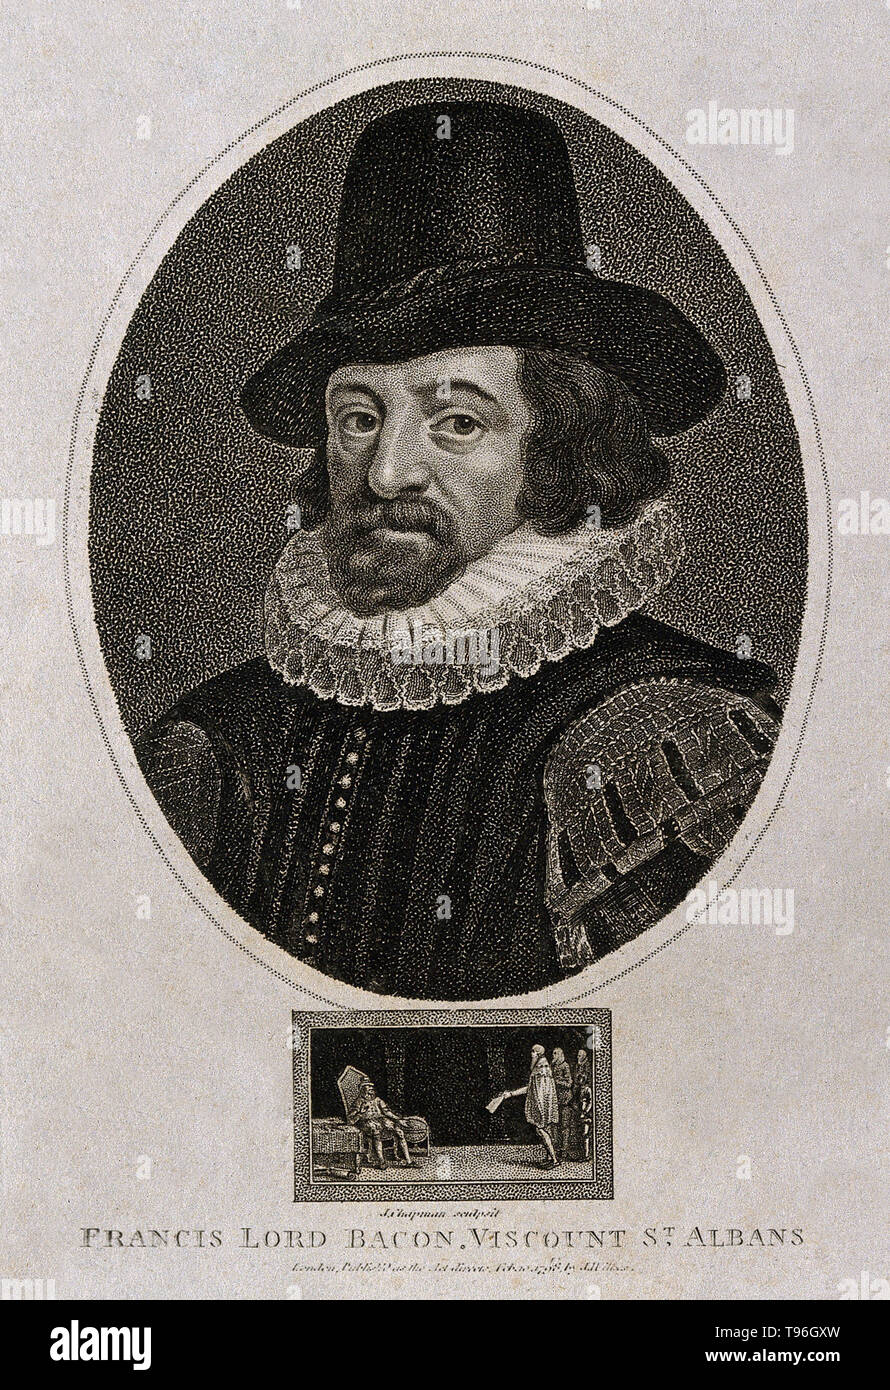 Francis Bacon, Viscount St Alban. Francis Bacon (January 22, 1561 - April 9, 1626) was an English philosopher, statesman, scientist, lawyer, jurist, author and pioneer of the scientific method. He served both as Attorney General and Lord Chancellor of England. His political career ended in disgrace in 1621. After he fell into debt, a Parliamentary Committee on the administration of the law charged him with twenty-three separate counts of corruption. Stock Photo